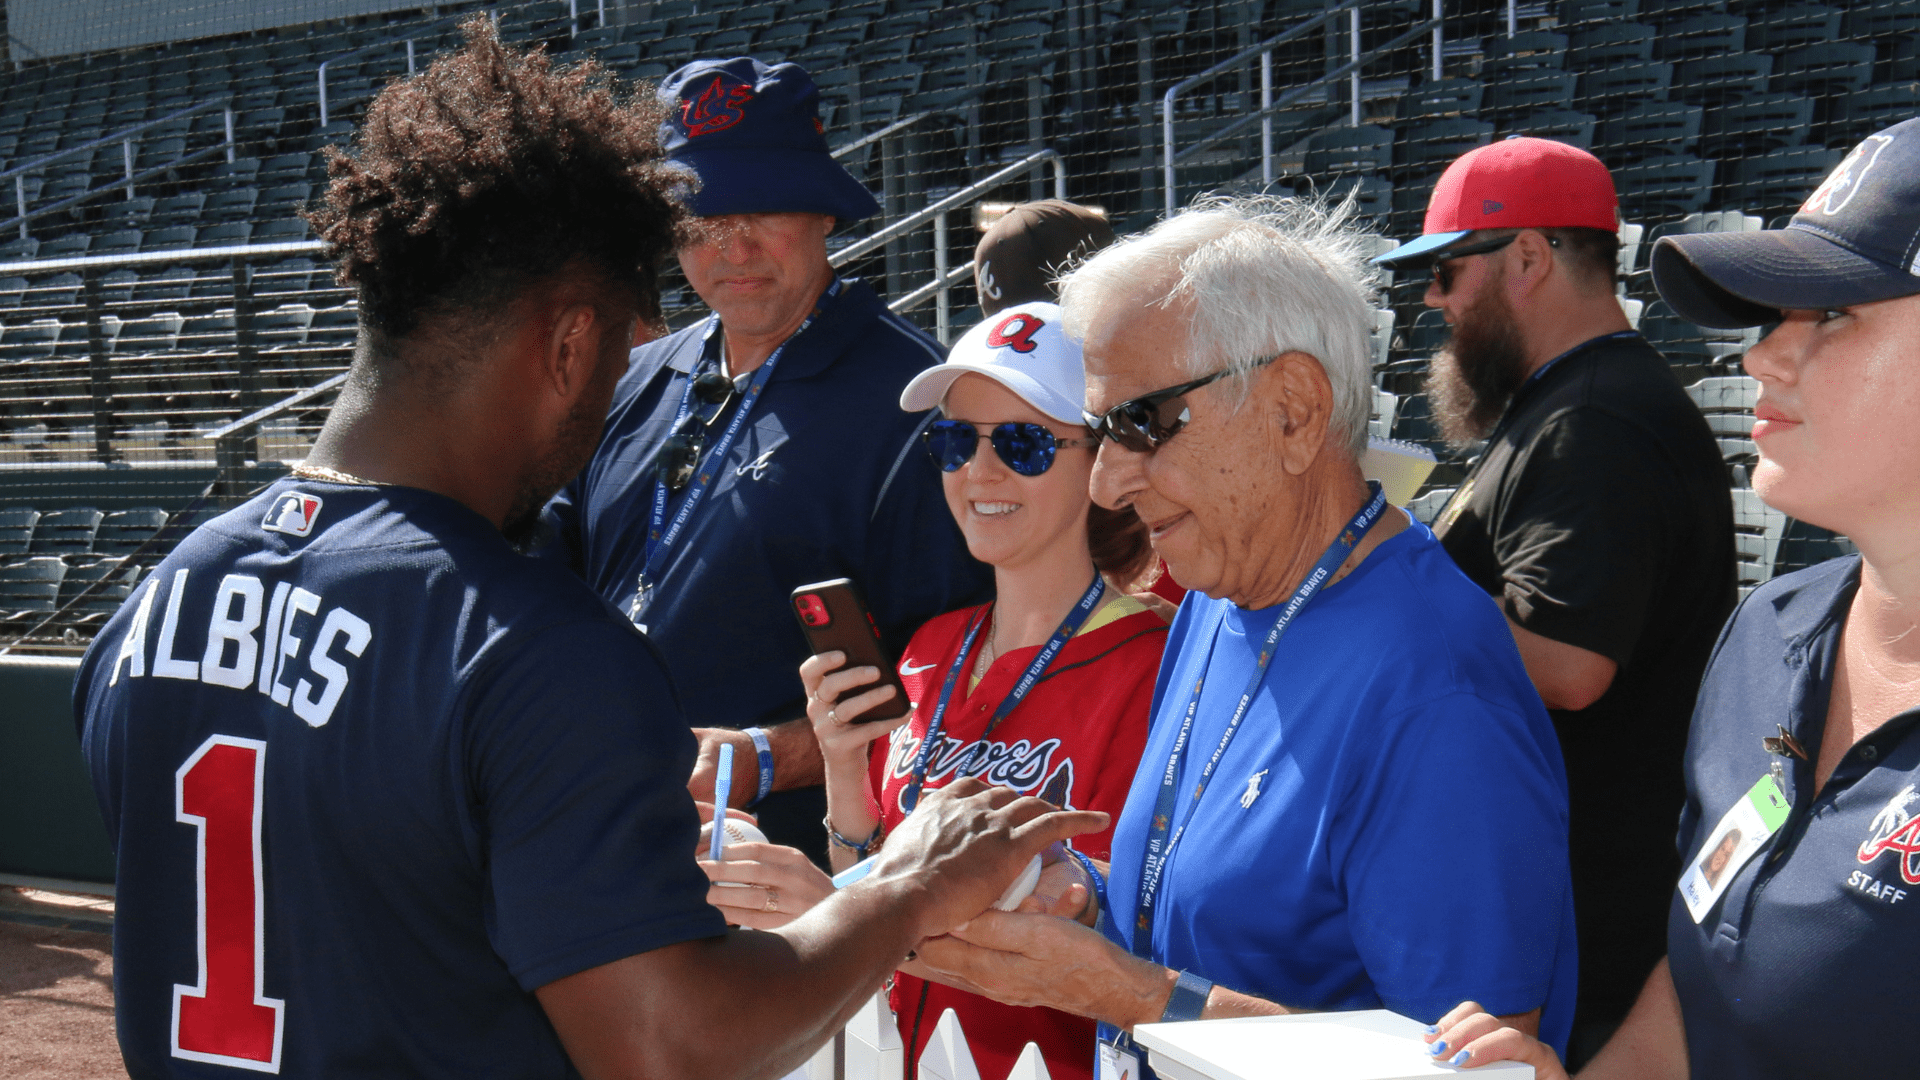 Ozzie Albies chatting with fans